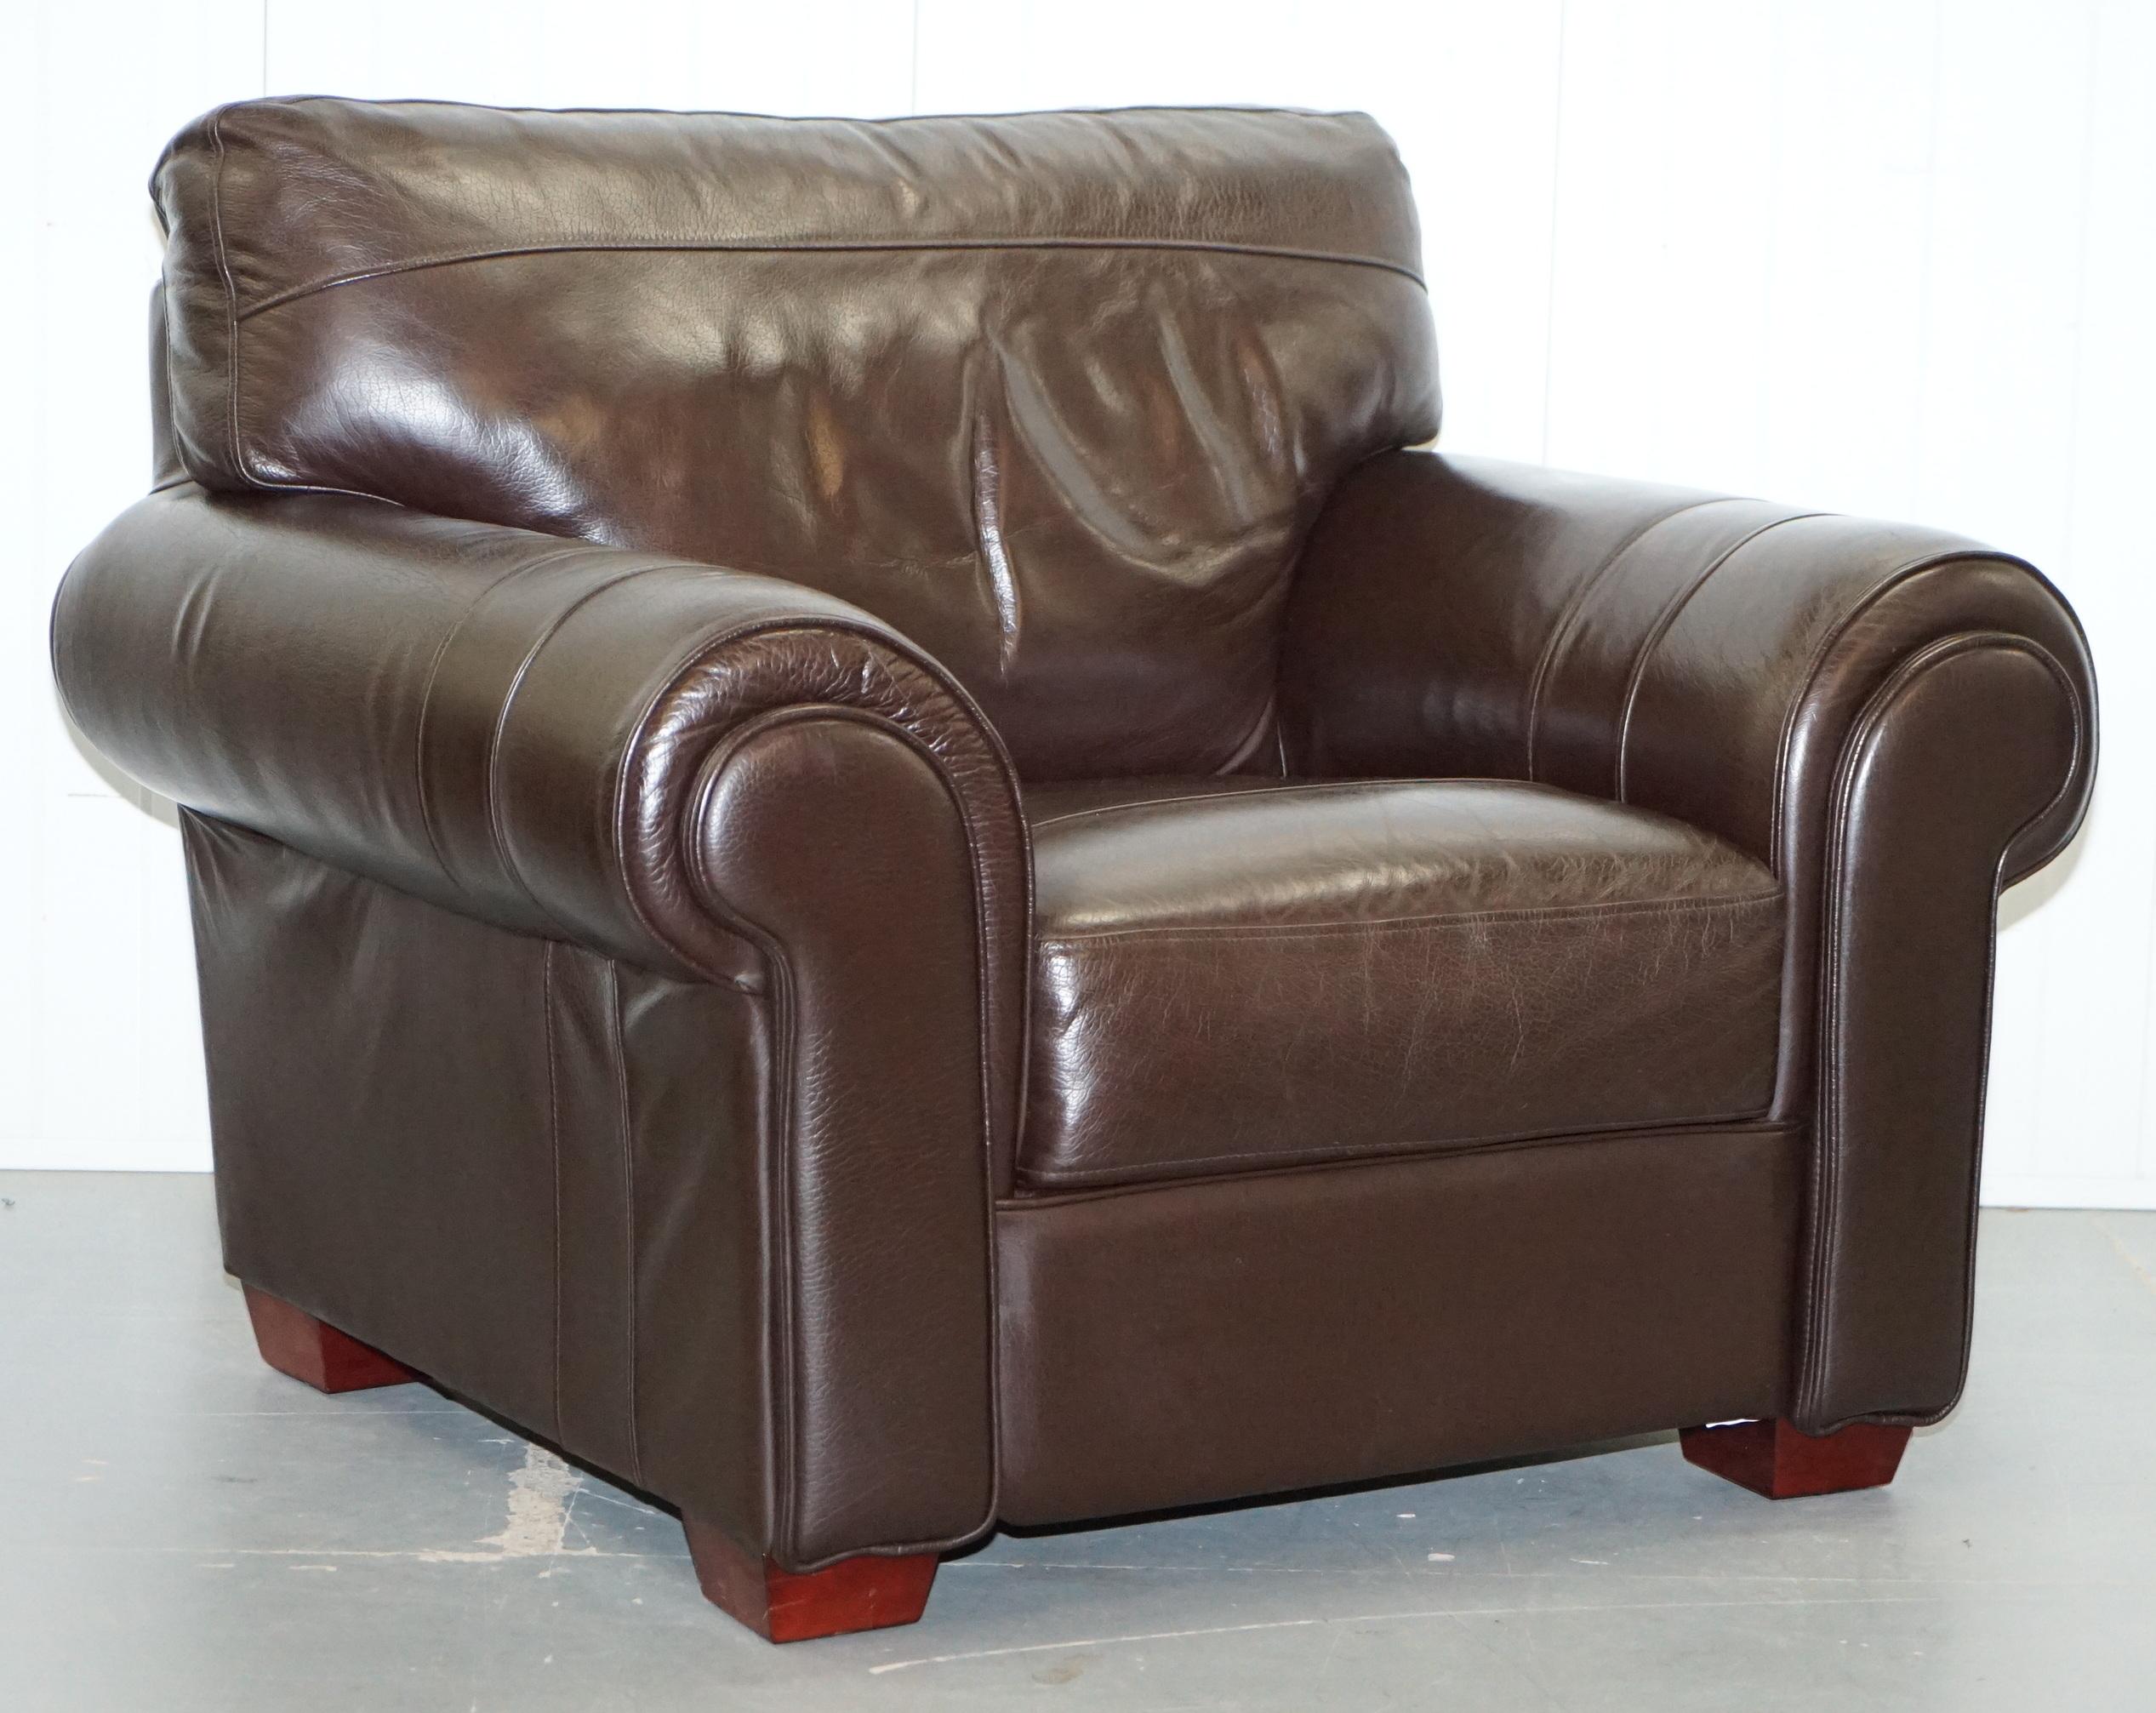 We are delighted to offer for sale this lovely pair of large comfortable solid brown leather armchairs with matching footstool

A good honest comfortable pair of chairs with stool, they are upholstered with cow hide semi aniline leather which is